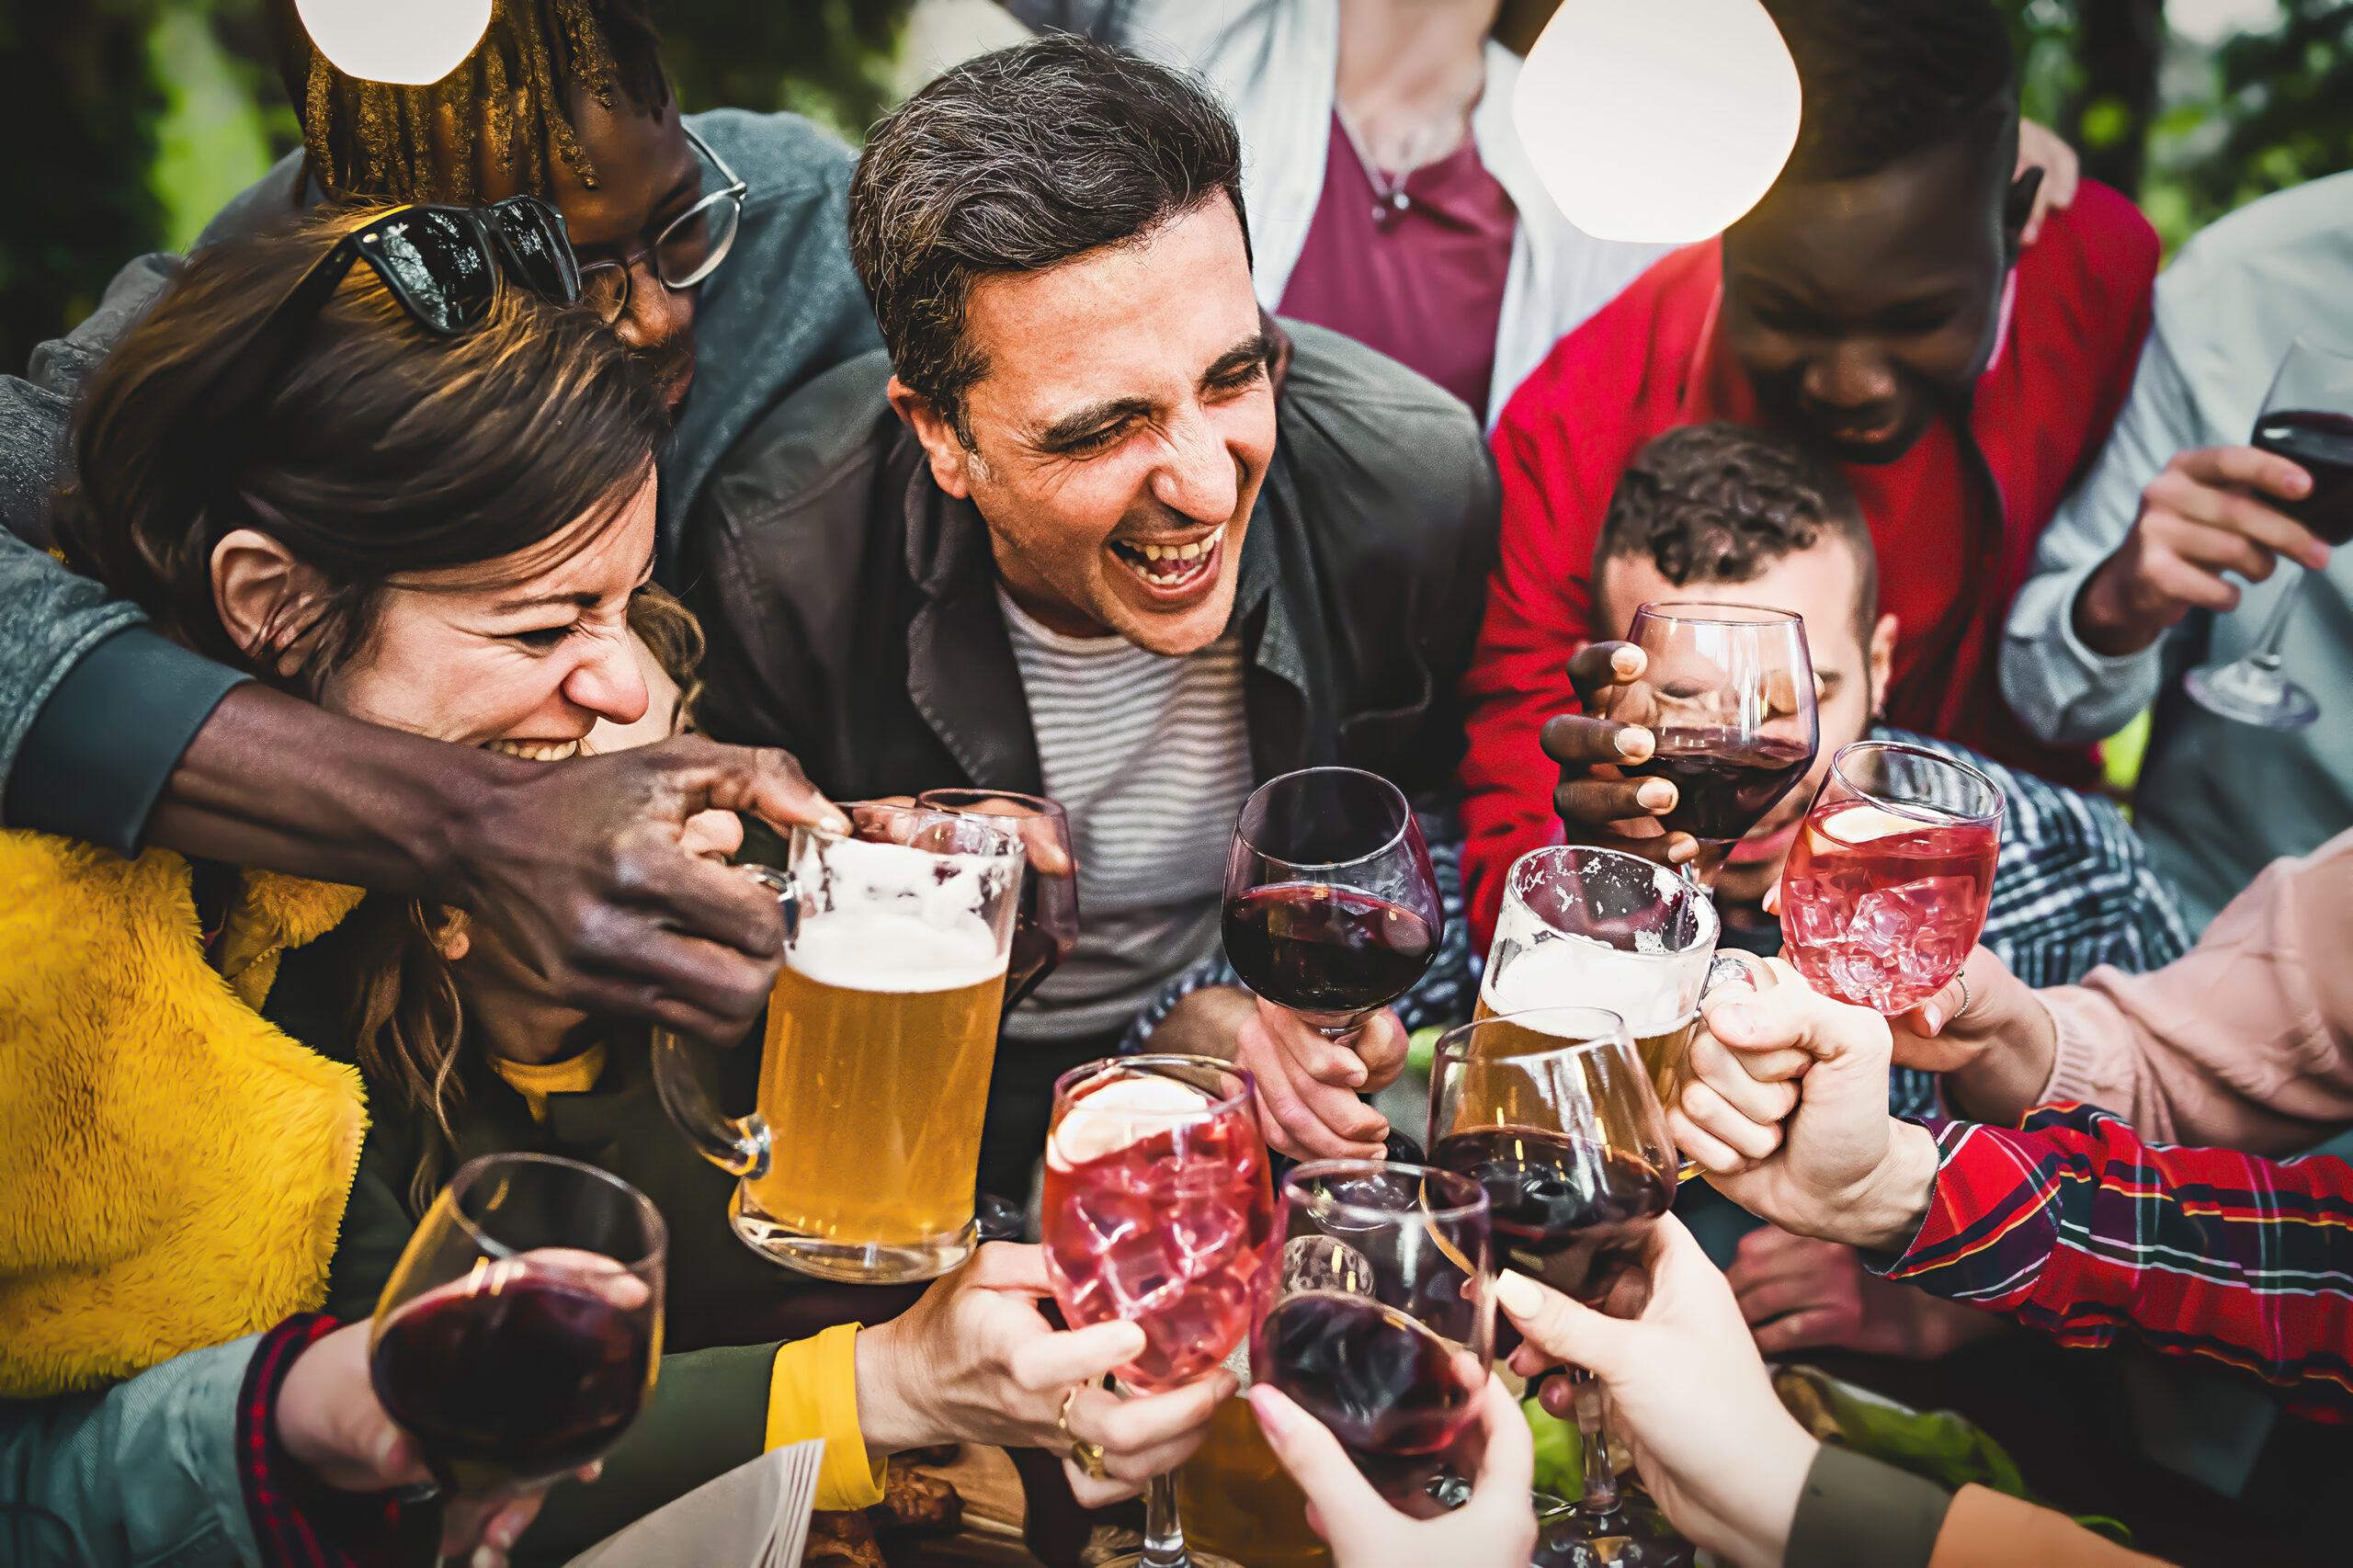 A group of individuals engaging in excessive alcohol consumption, with various alcoholic beverages in hand, during a social gathering.